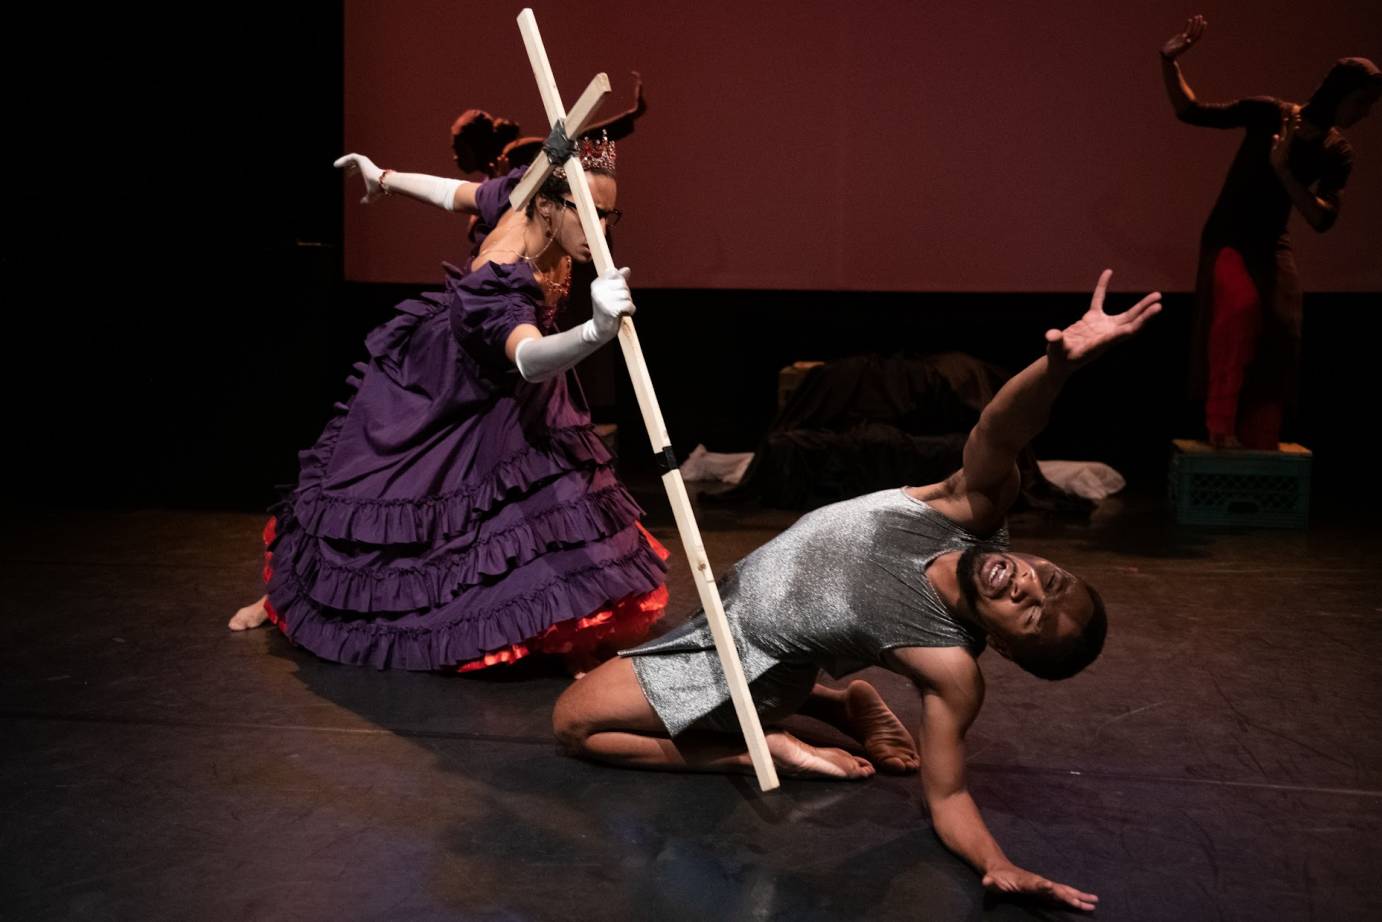 A man clothed in a long purple dress and long white gloves holds a 5' white cross as weapon against a man on his knees who kneels in front of him. The man on the ground is bent backward reaching one arm beseechingly. 